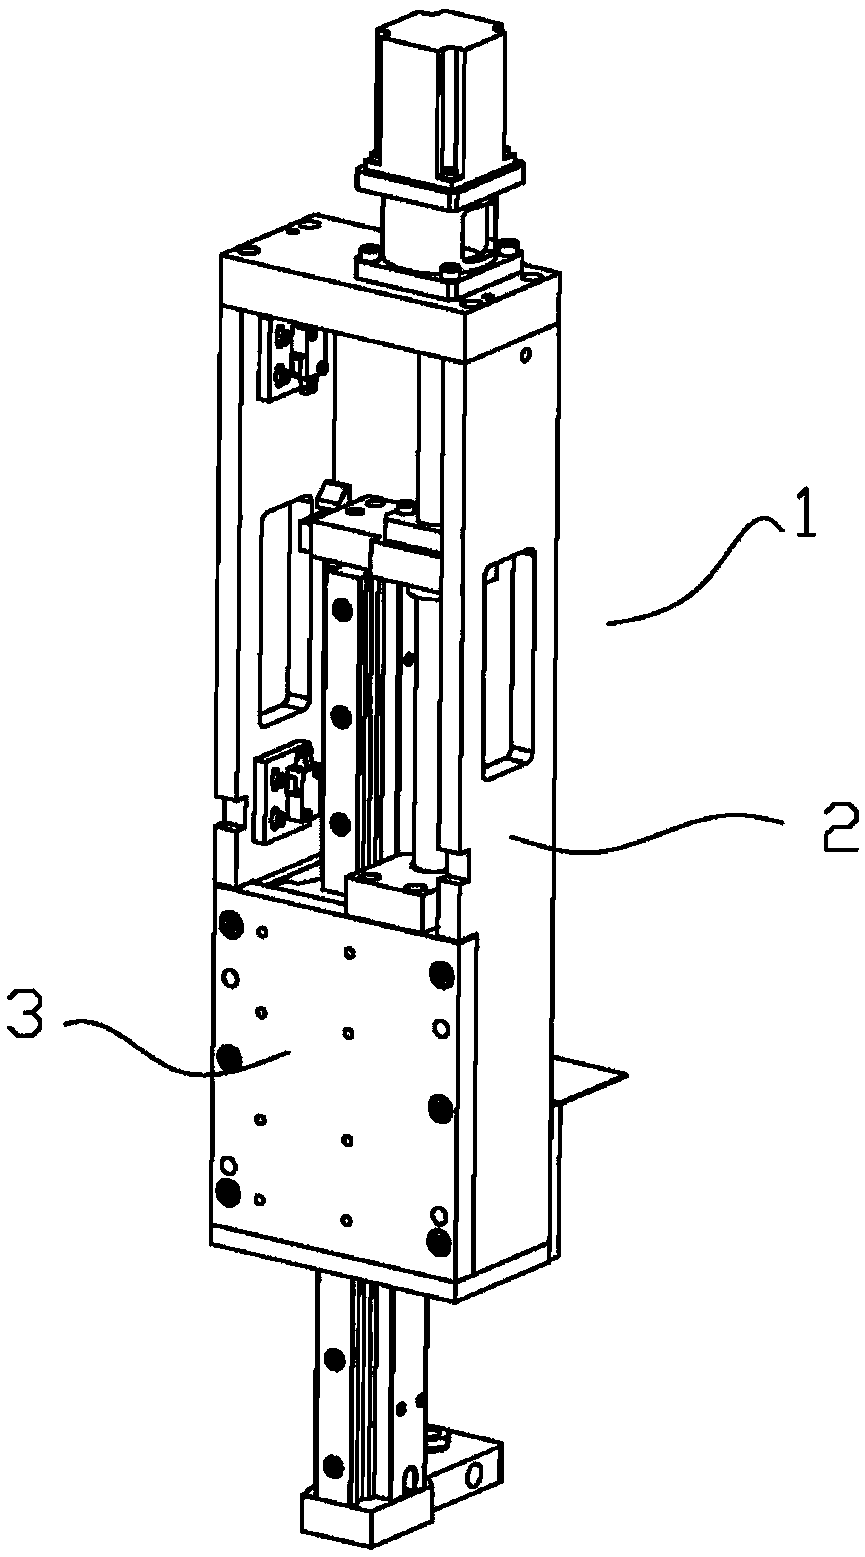 High-precision vertical depth positioning device of numerically-controlled reciprocating wire cutting machine tool